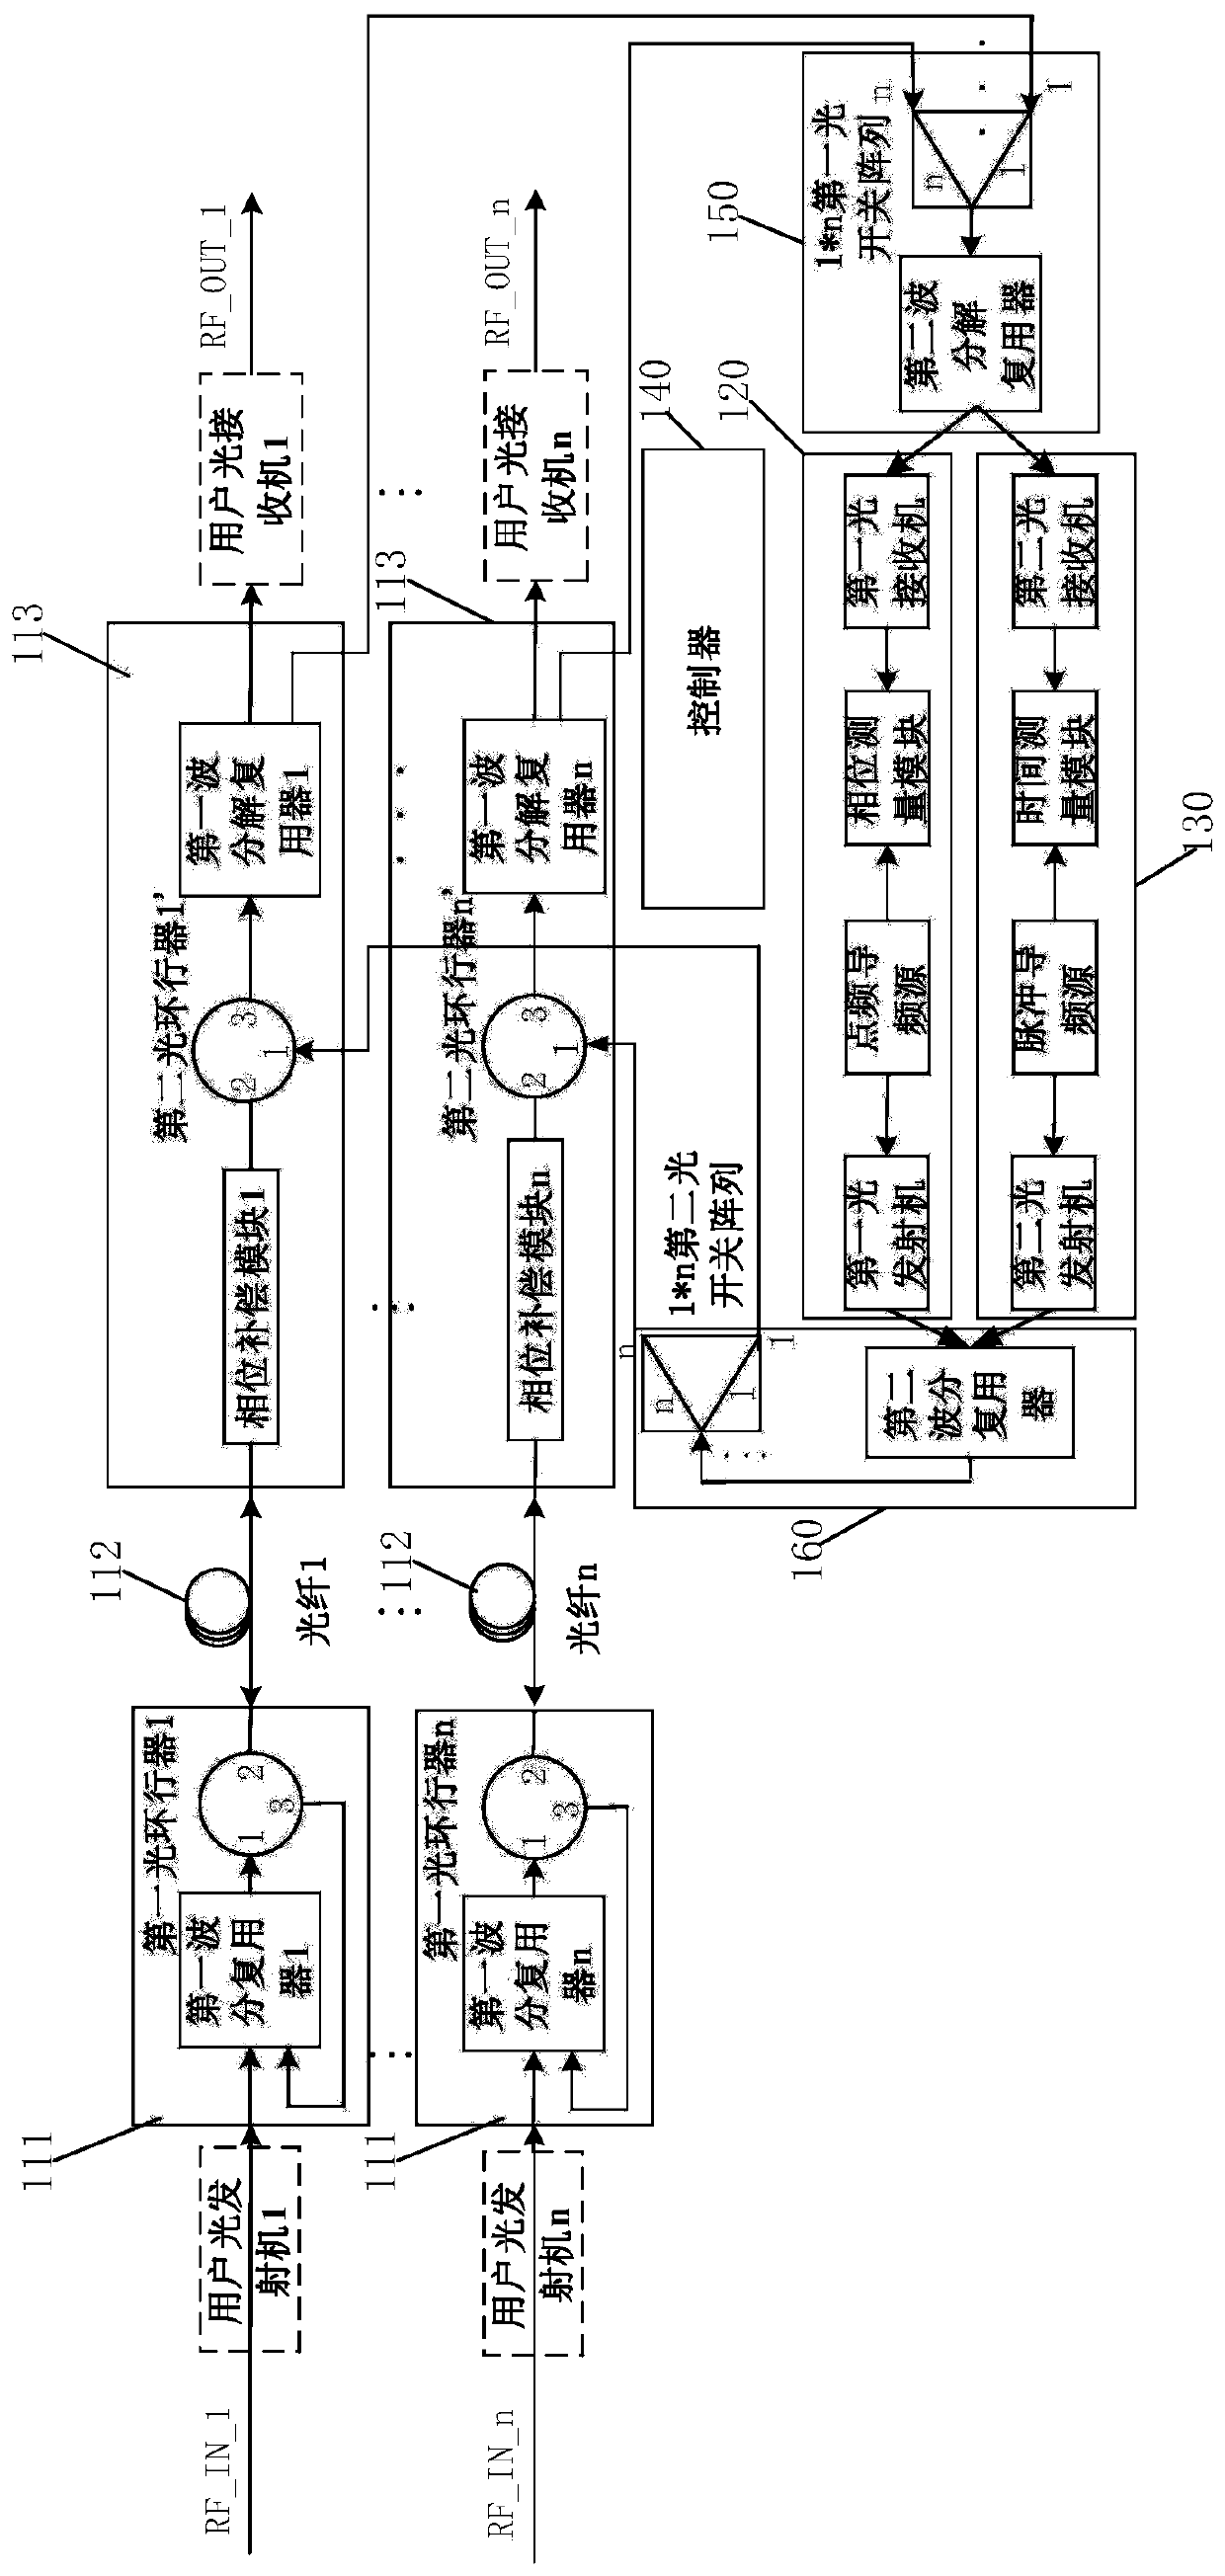 Multi-channel broadband microwave optical transmission link receiving end phase stabilization device